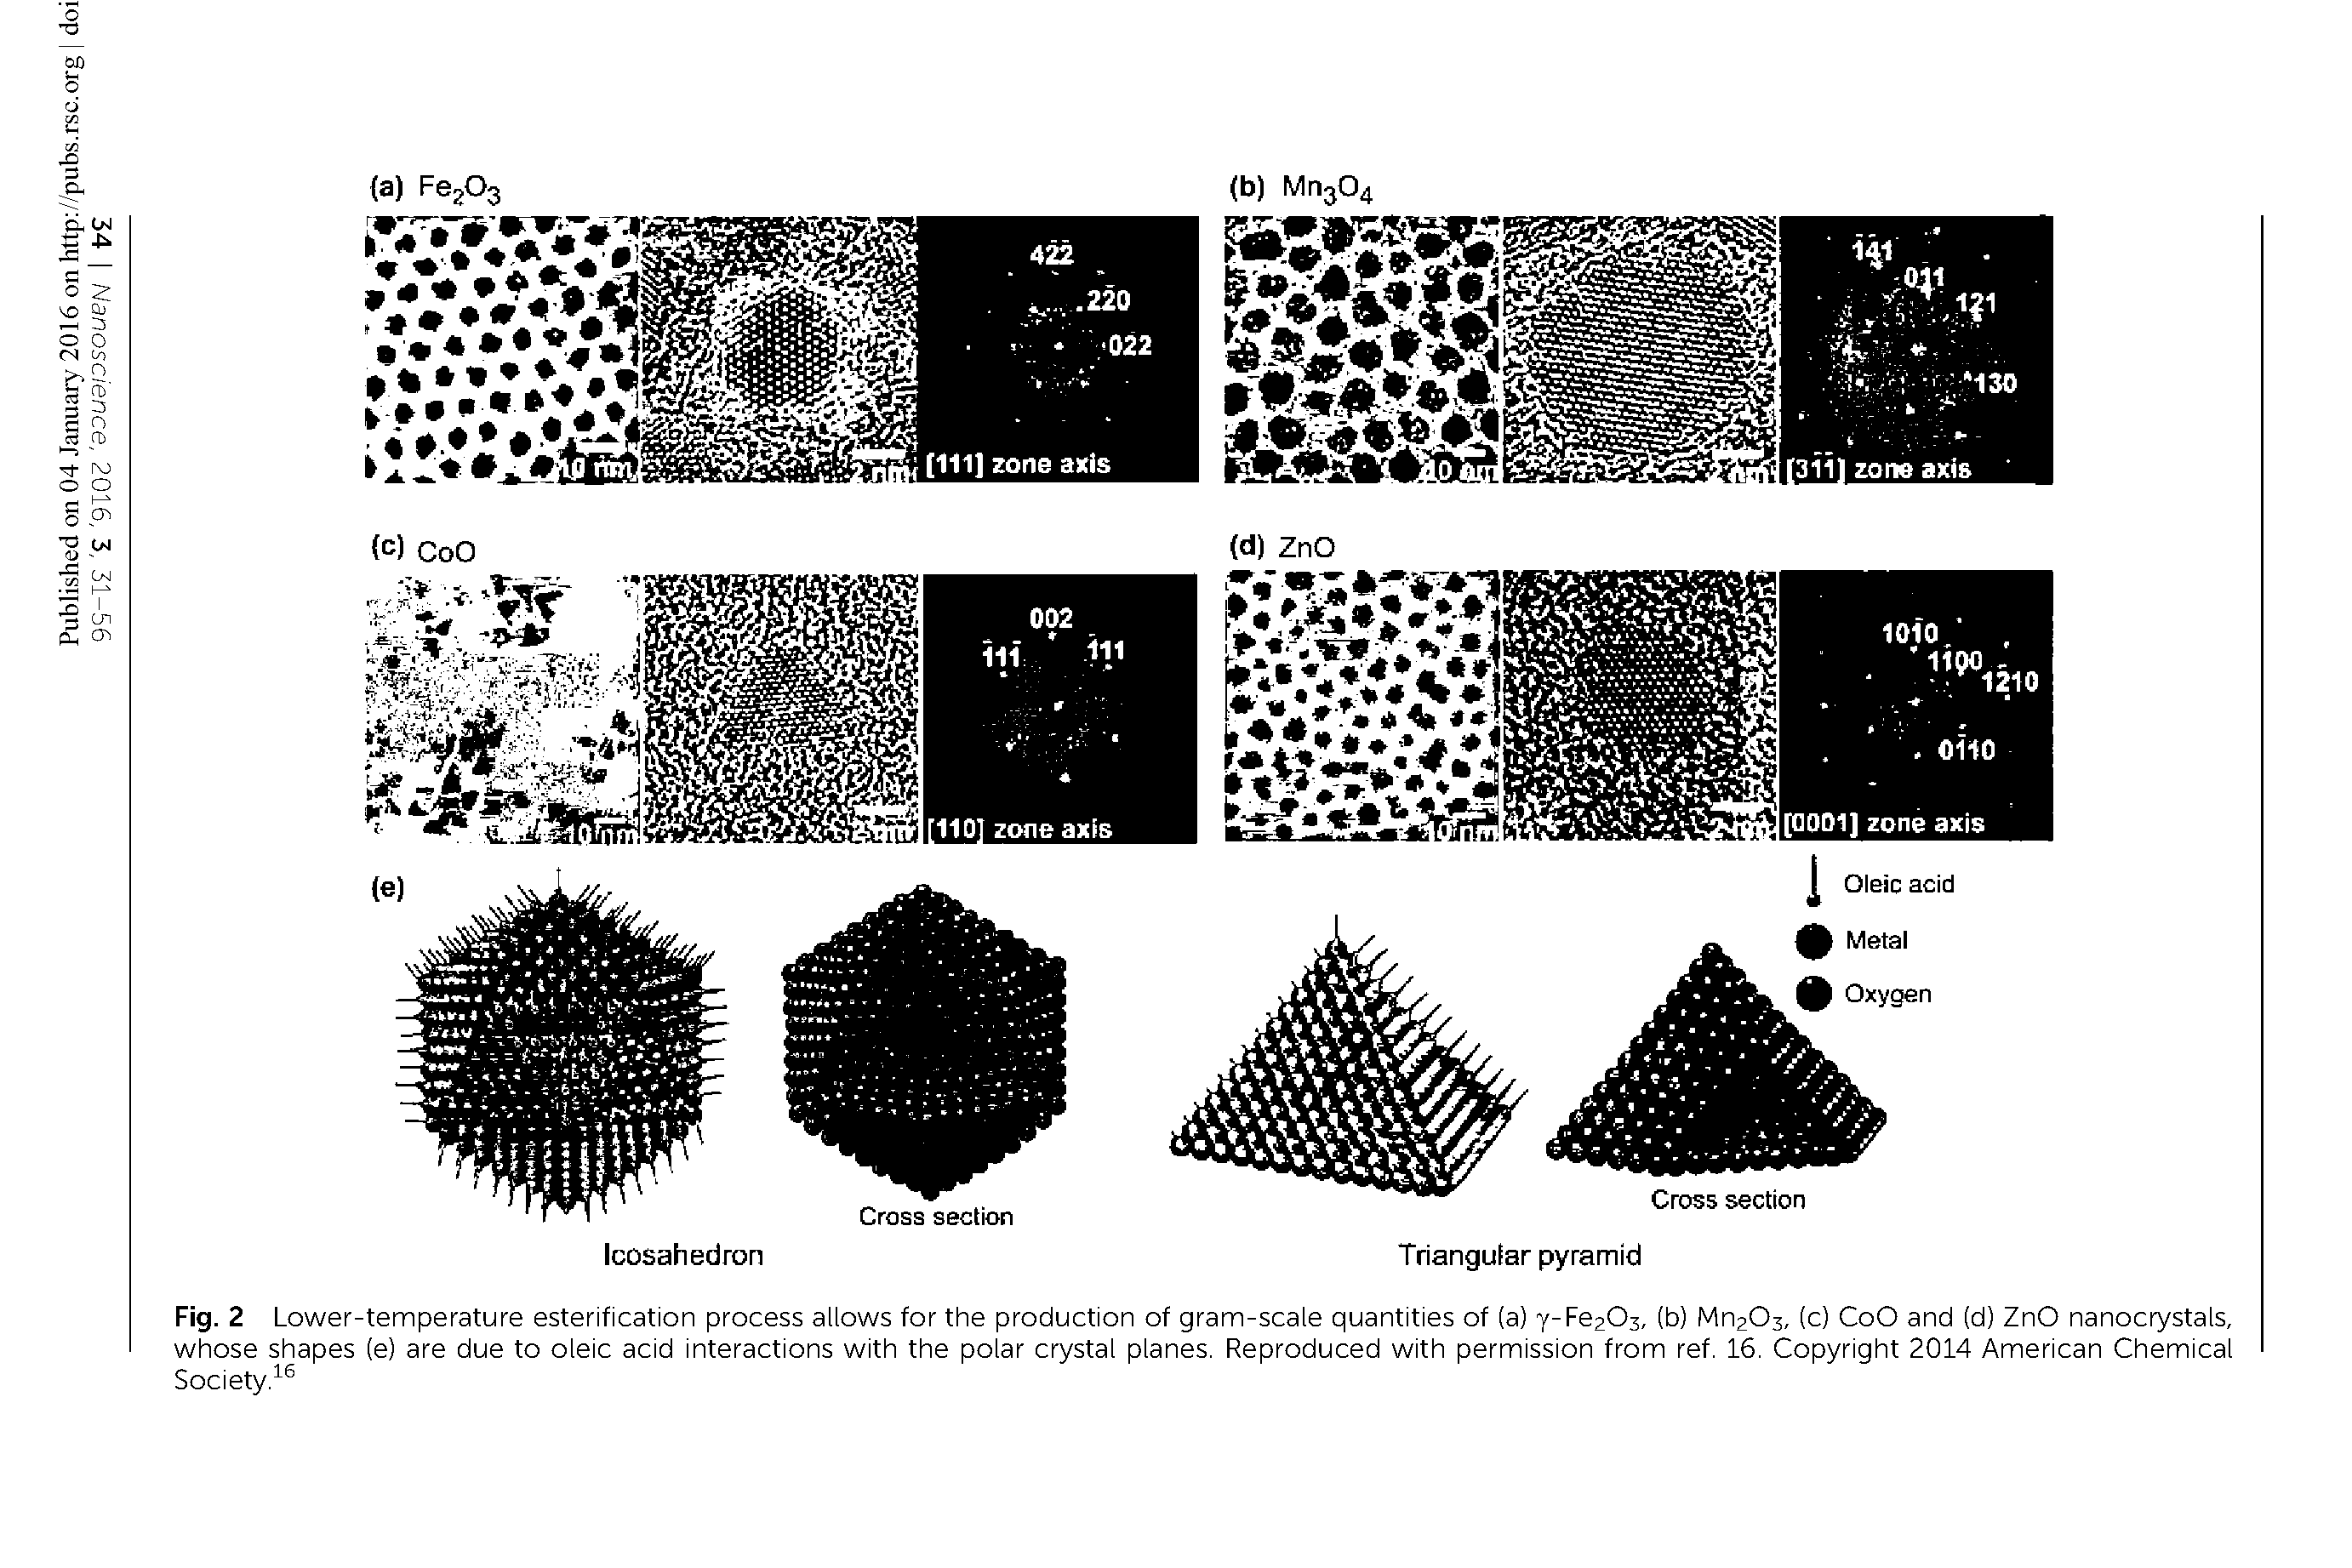 Fig. 2 Lower-temperature esterification process allows for the production of gram-scale quantities of (a) y-Fe203, (b) Mn203, (c) CoO and (d) ZnO nanocrystals, whose shapes (e) are due to oleic acid interactions with the polar crystal planes. Reproduced with permission from ref. 16. Copyright 2014 American Chemical Society. ...